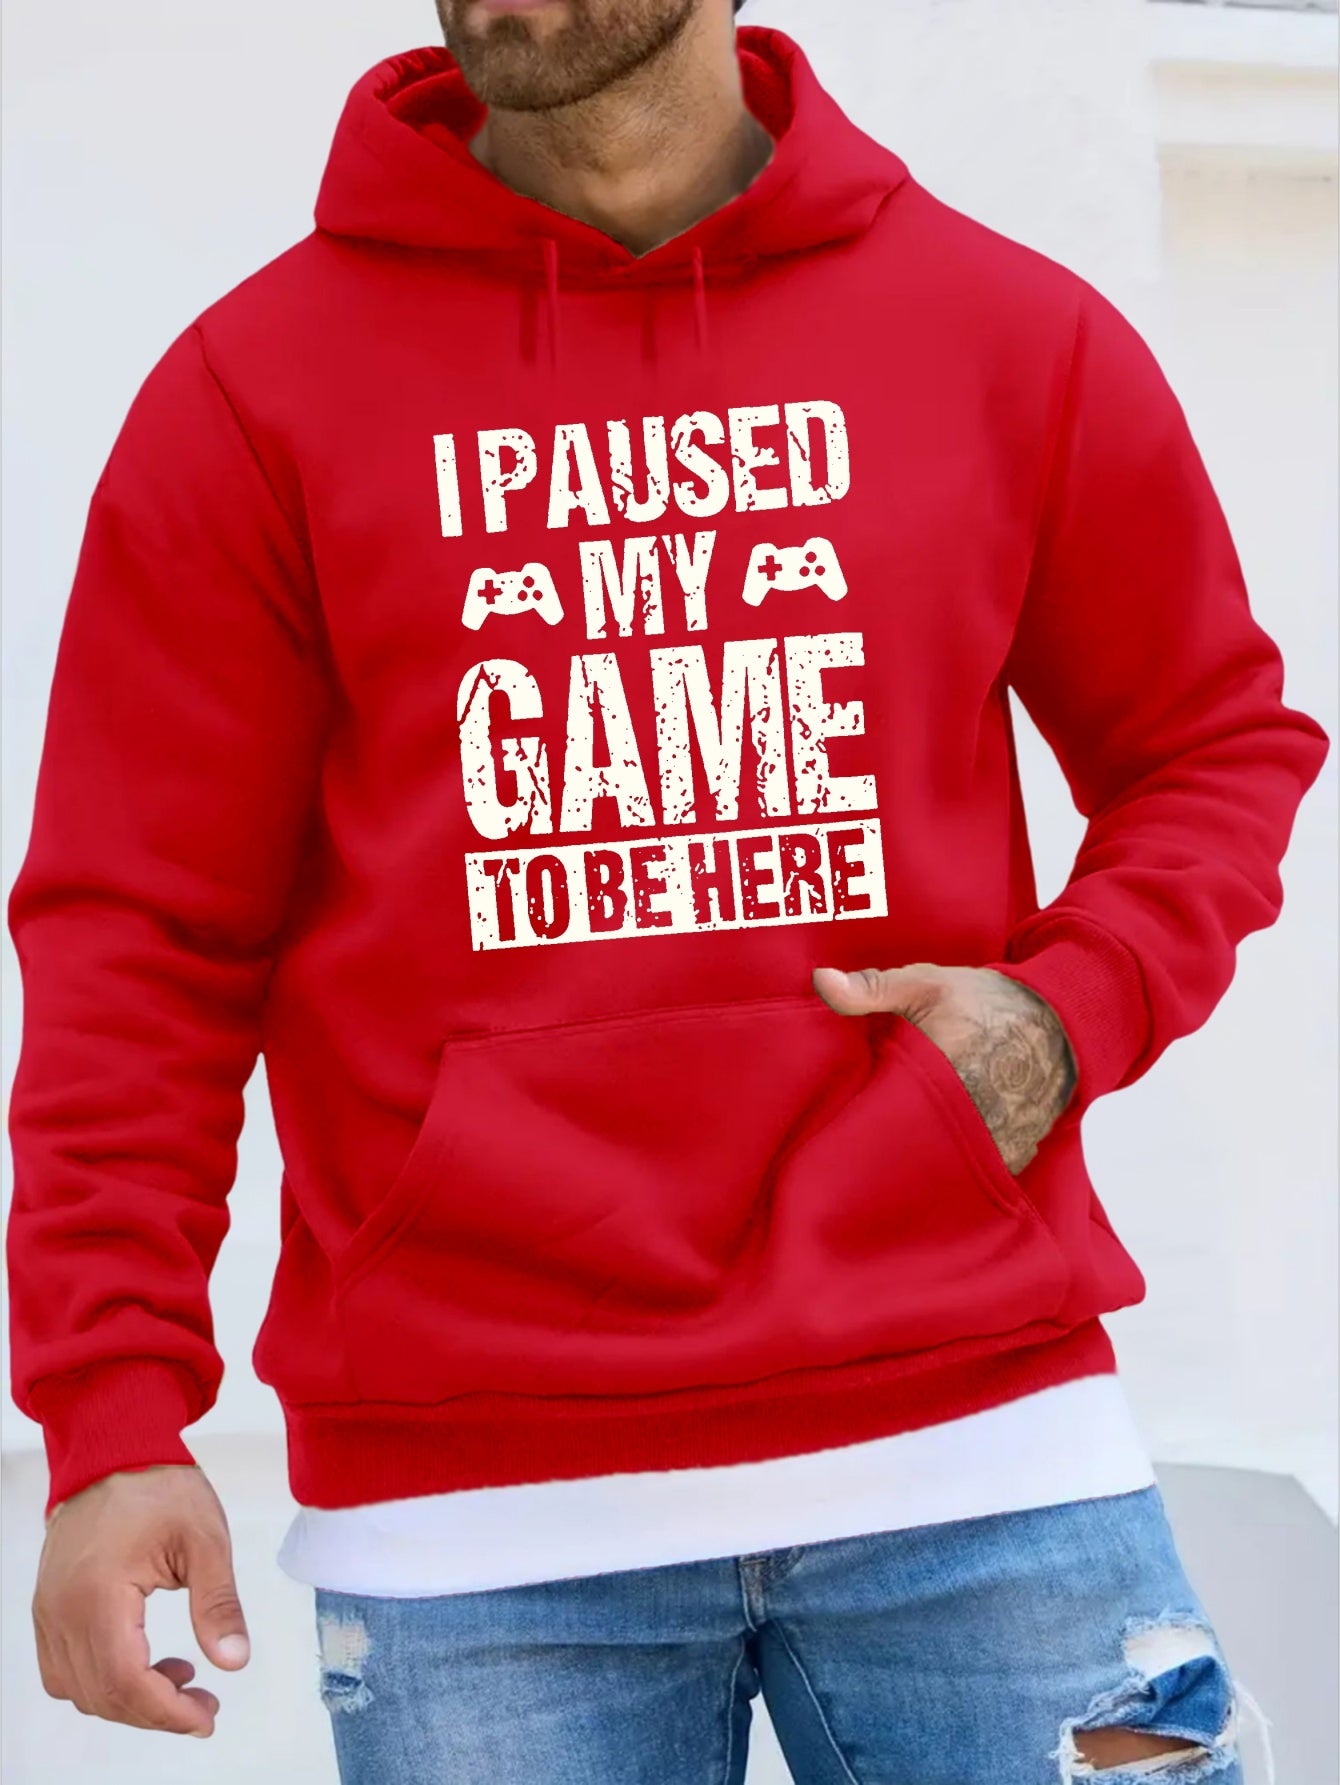 Funny I Paused My Game Print Hoodie, Cool Hoodies For Men, Men's Casual Graphic Design Pullover Hooded Sweatshirt With Kangaroo Pocket Streetwear For Winter Fall, As Gifts